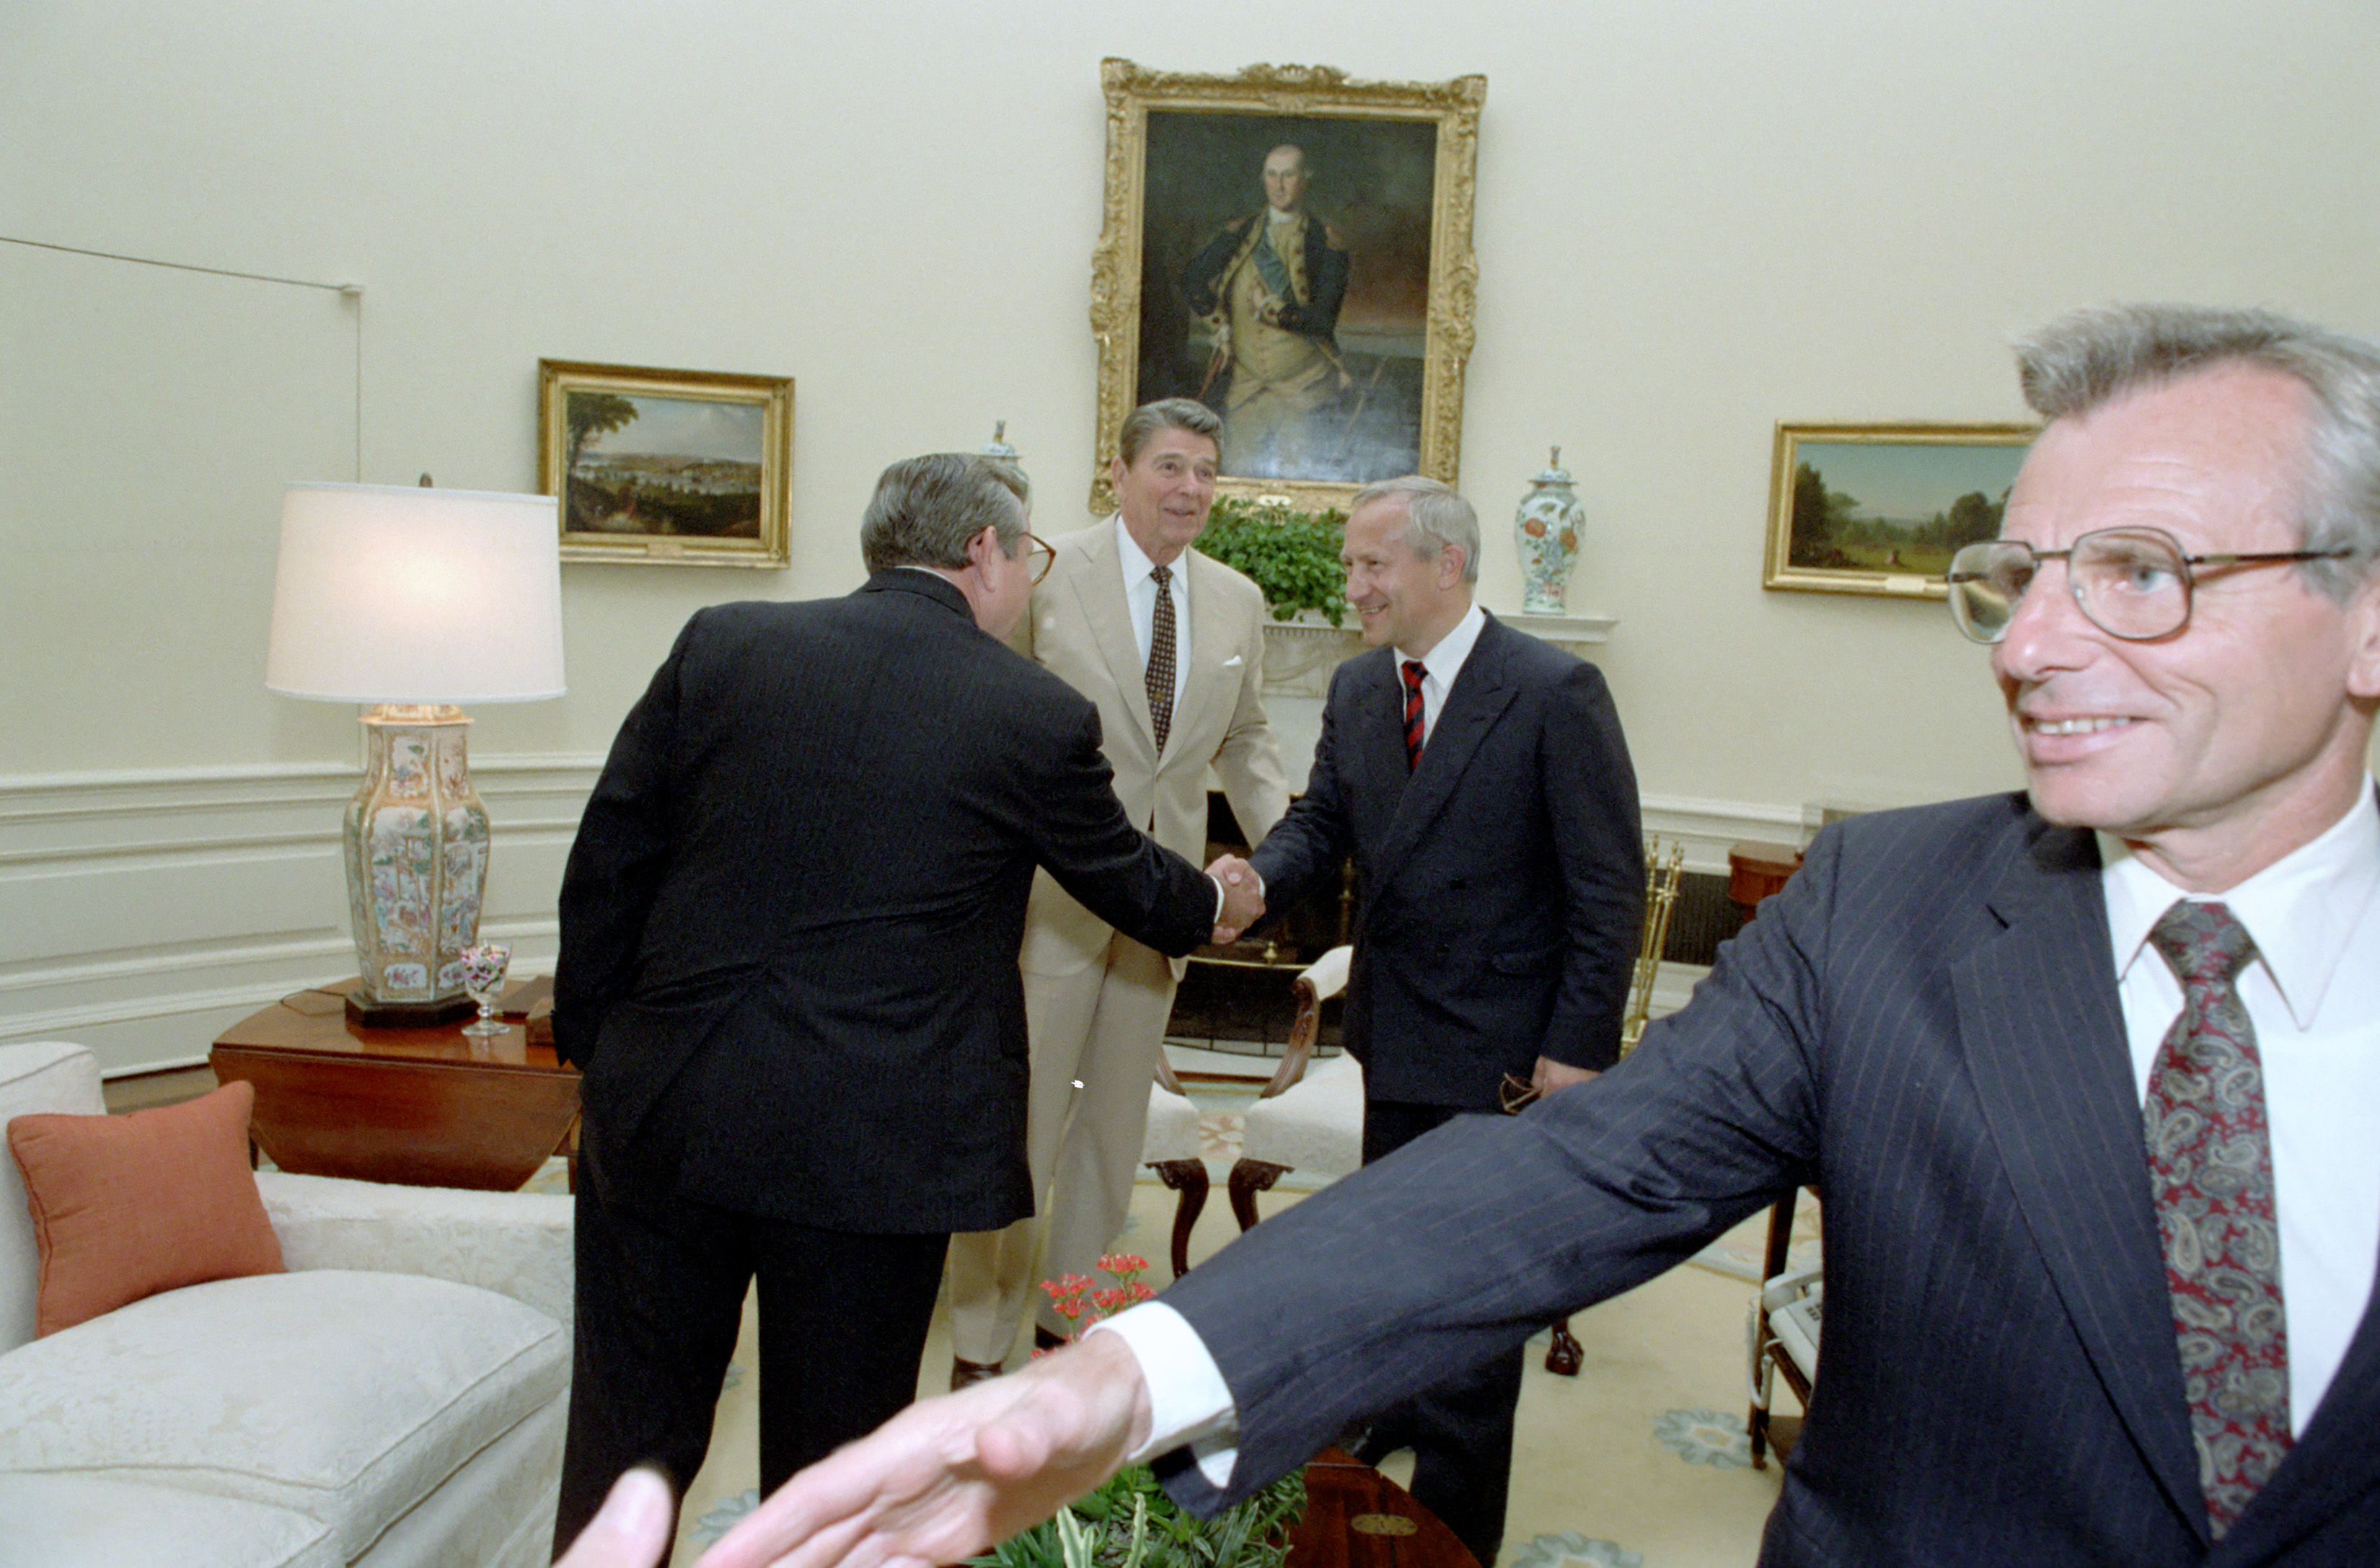 Reagan’s meeting with Oleg Gordievsky in the Oval Office (09)